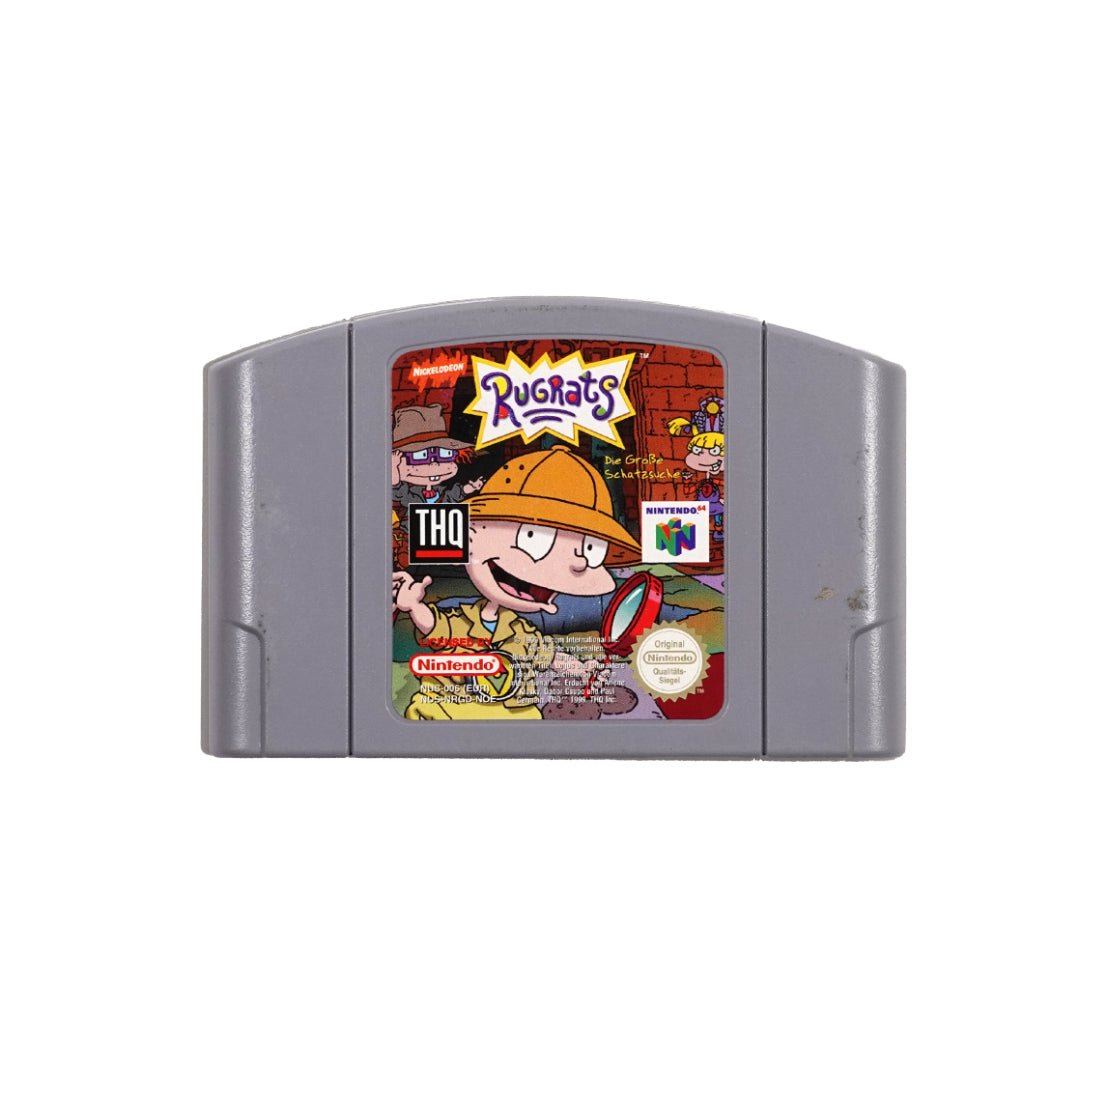 (Pre-Owned) Rugrats - Nintendo 64 - Store 974 | ستور ٩٧٤